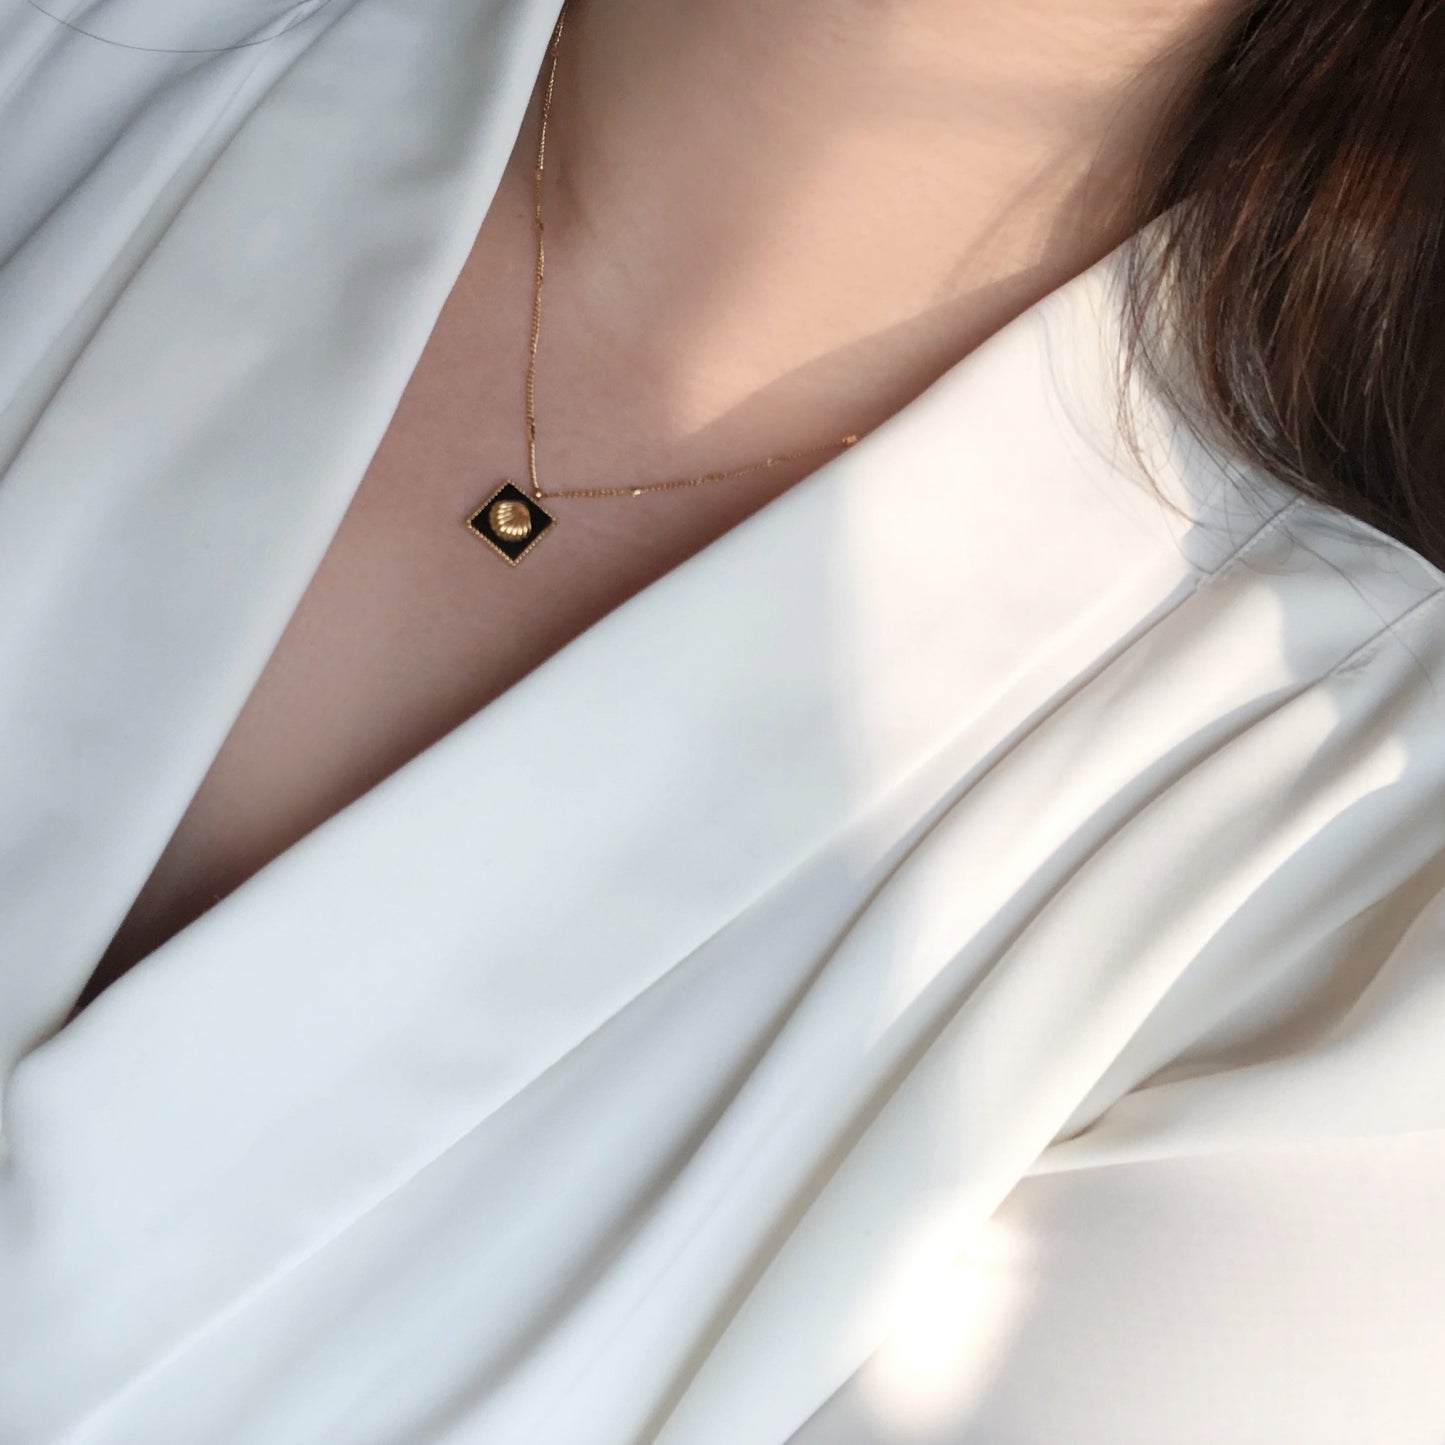 Minimalist Gold-Plated Square Pendant Necklace with Shell Design